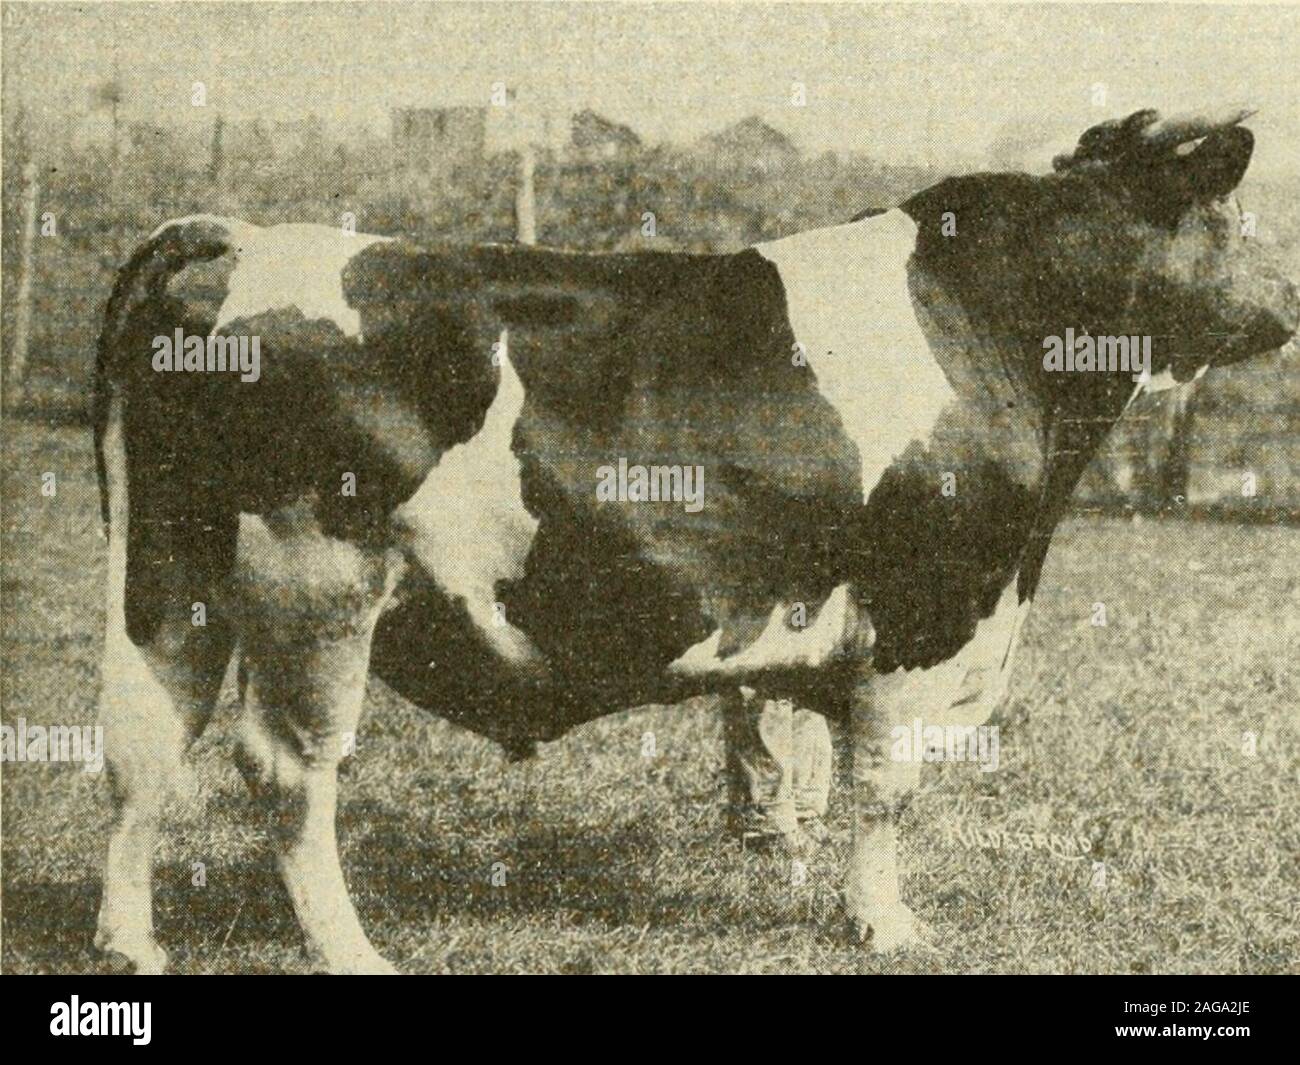 . Types and market classes of live stock. y considerable degree of thickness is sharply criticized.Some dairy bulls almost rival beef bulls in the amount offleshing shown in the hindquarters, and such animals aredistinctly not of true dairy type in conformation and temper-ament. A dairy bull should carry no more fleshing than ispermissible in a dry cow or in a heifer before her first calv-ing. The bull should be well divided between the hind legs, andshould have rather flat, trim thighs. The hind legs should be Types and Market Classes of Live Stock 129 placed rather well apart, and should be Stock Photo